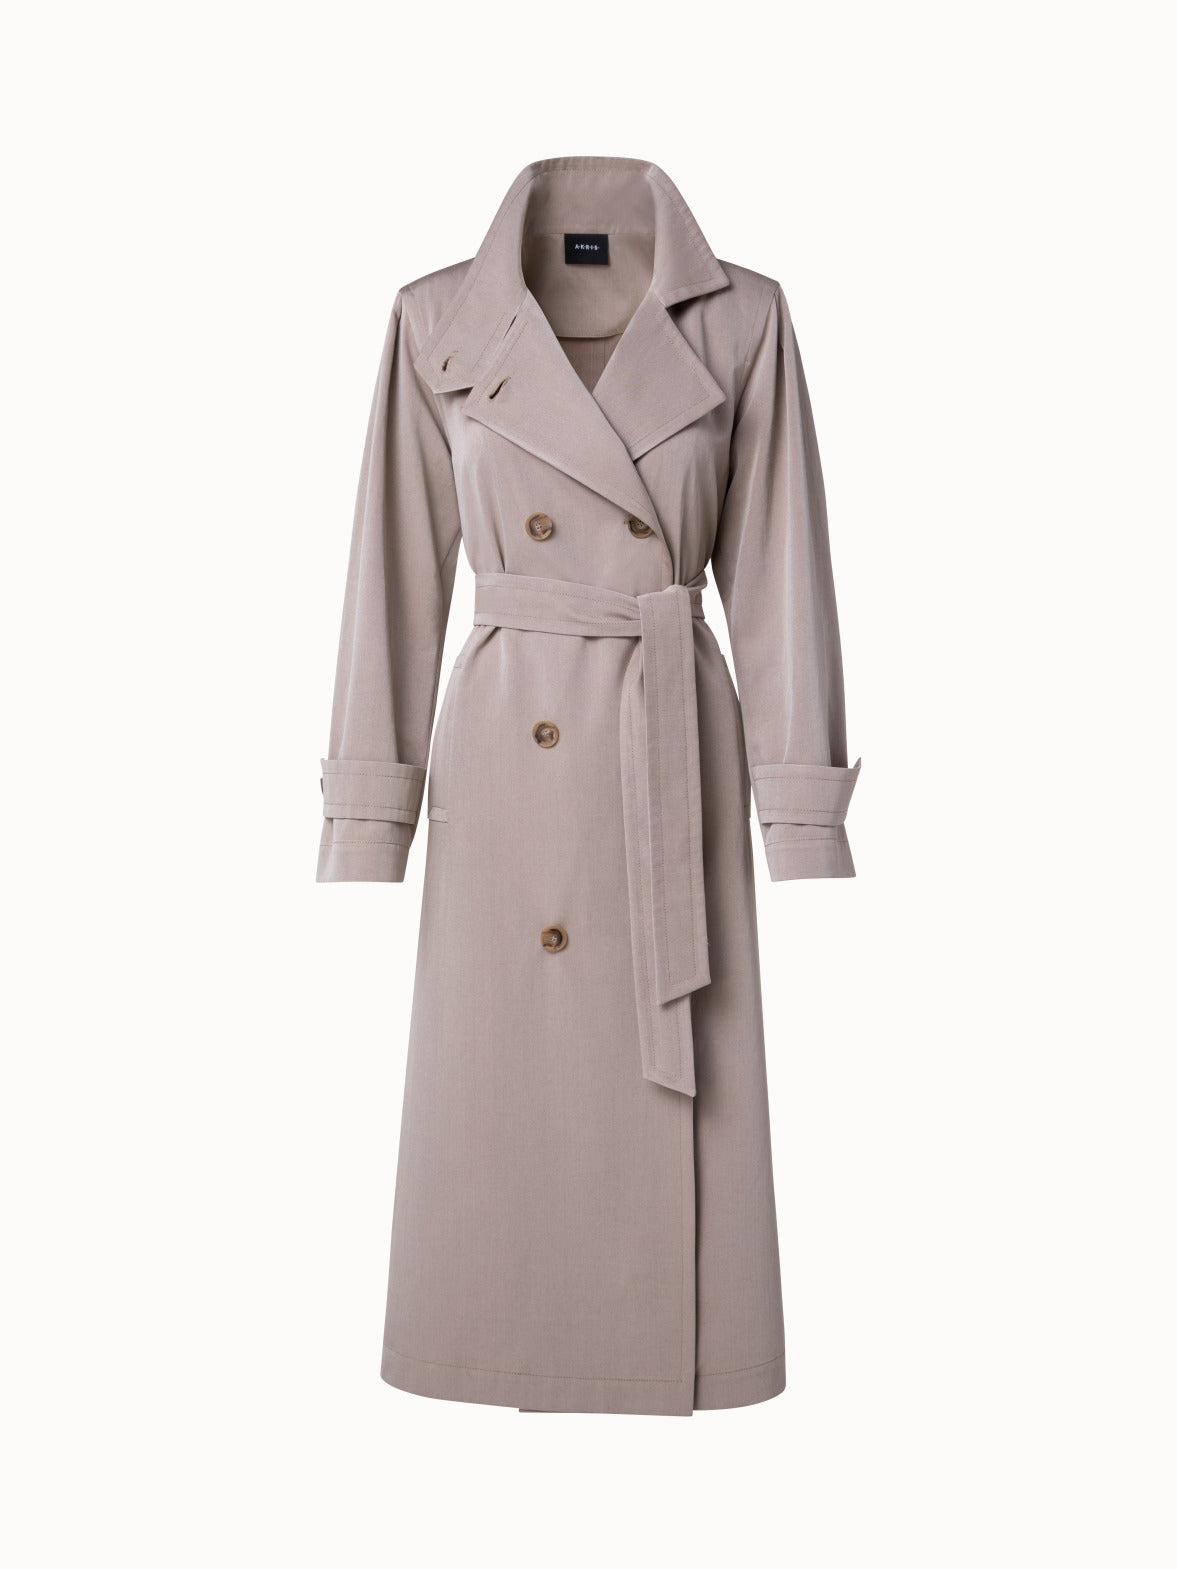 Belted Trench Coat with Criss Cross Collar Beige Cotton Gabardine